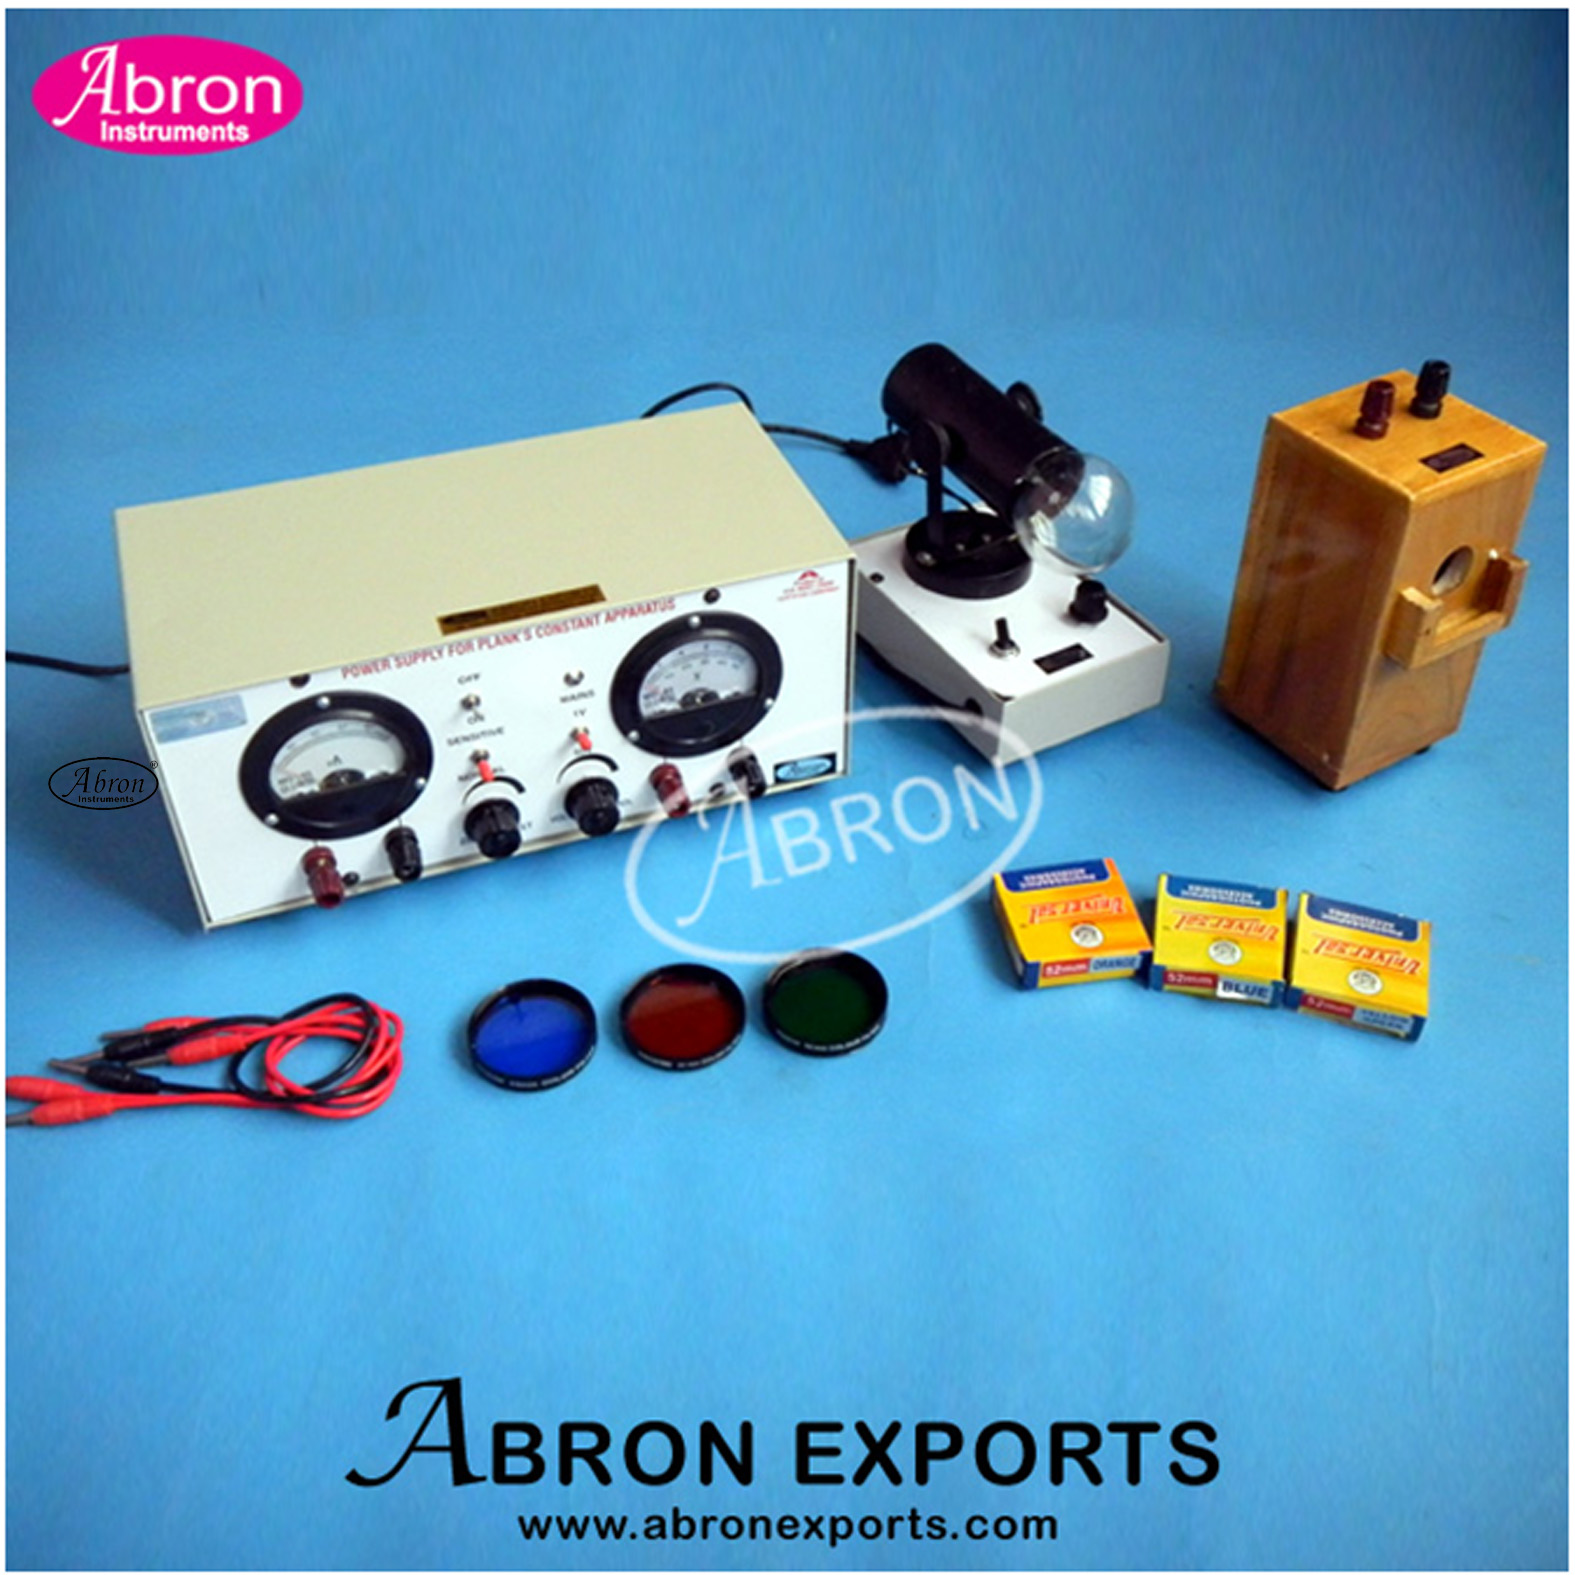 Photo Cell Tube with lamp house filters 2 meters With power supply to study response of light abron AE-1372B